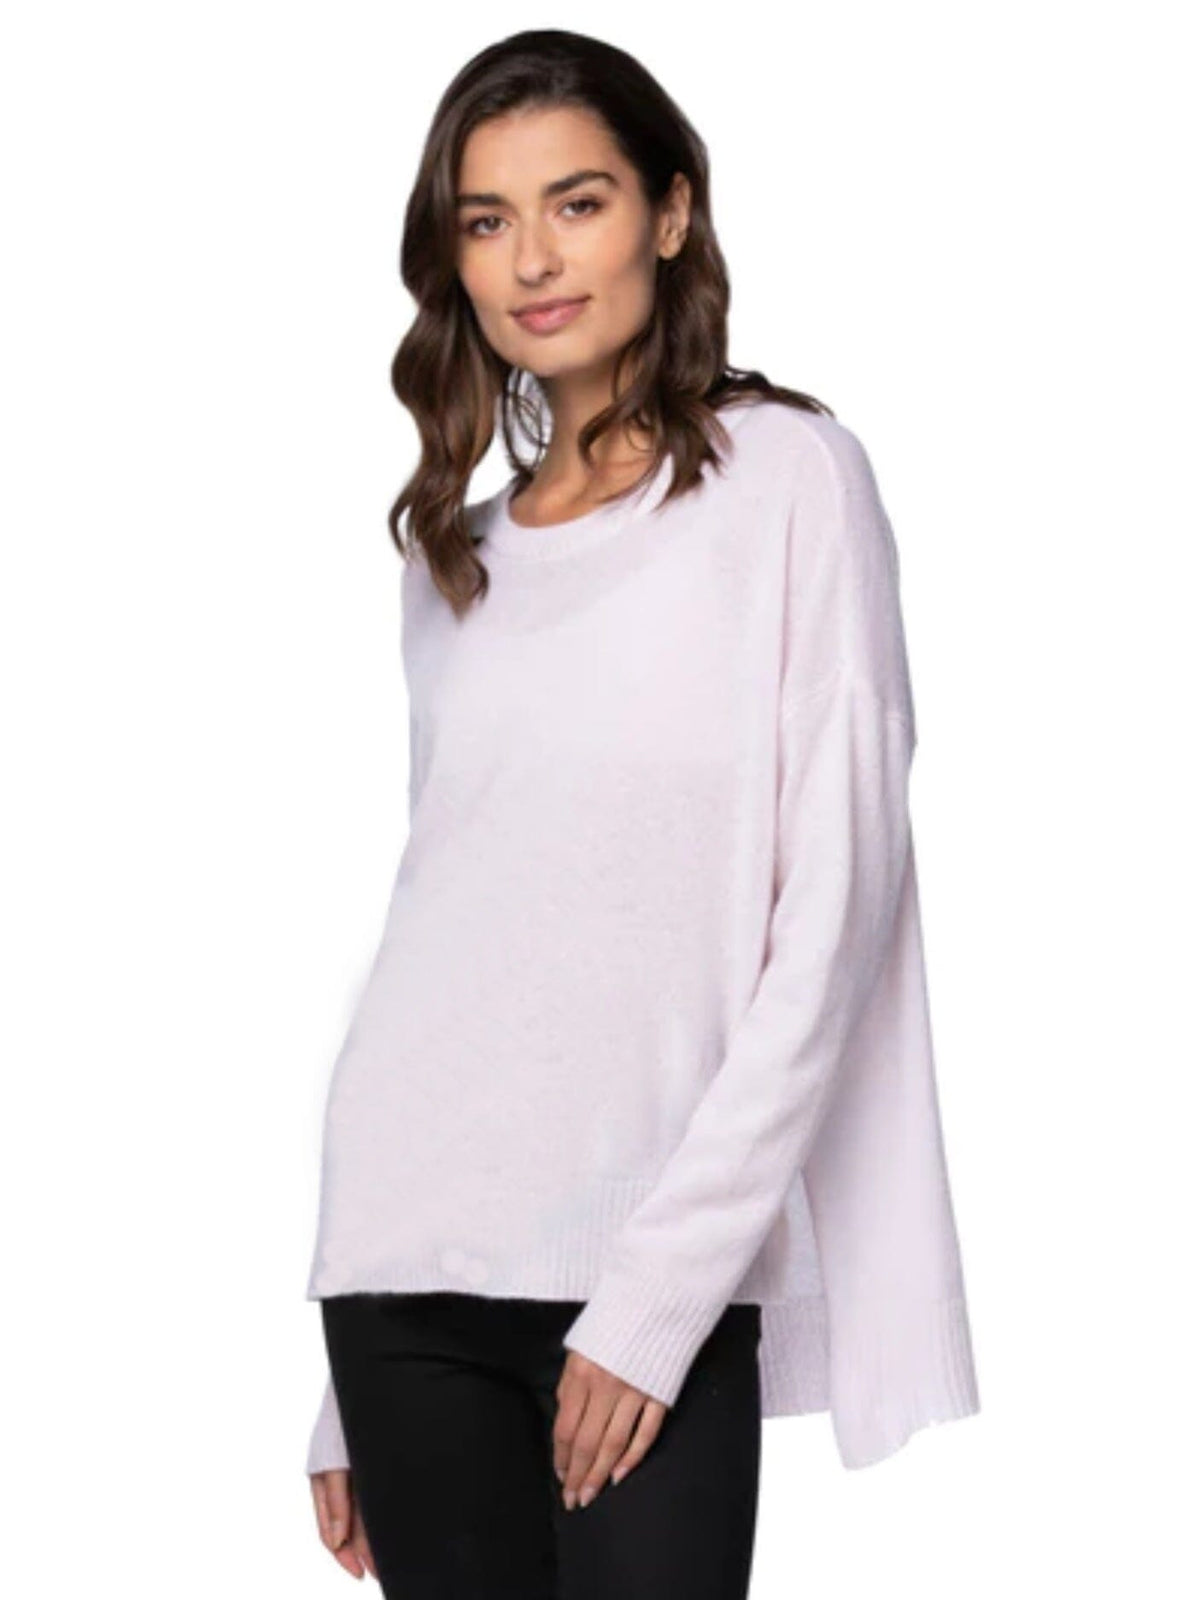 Cashmere with Removable Cowl Tops MOM fave Fragrance S/M 